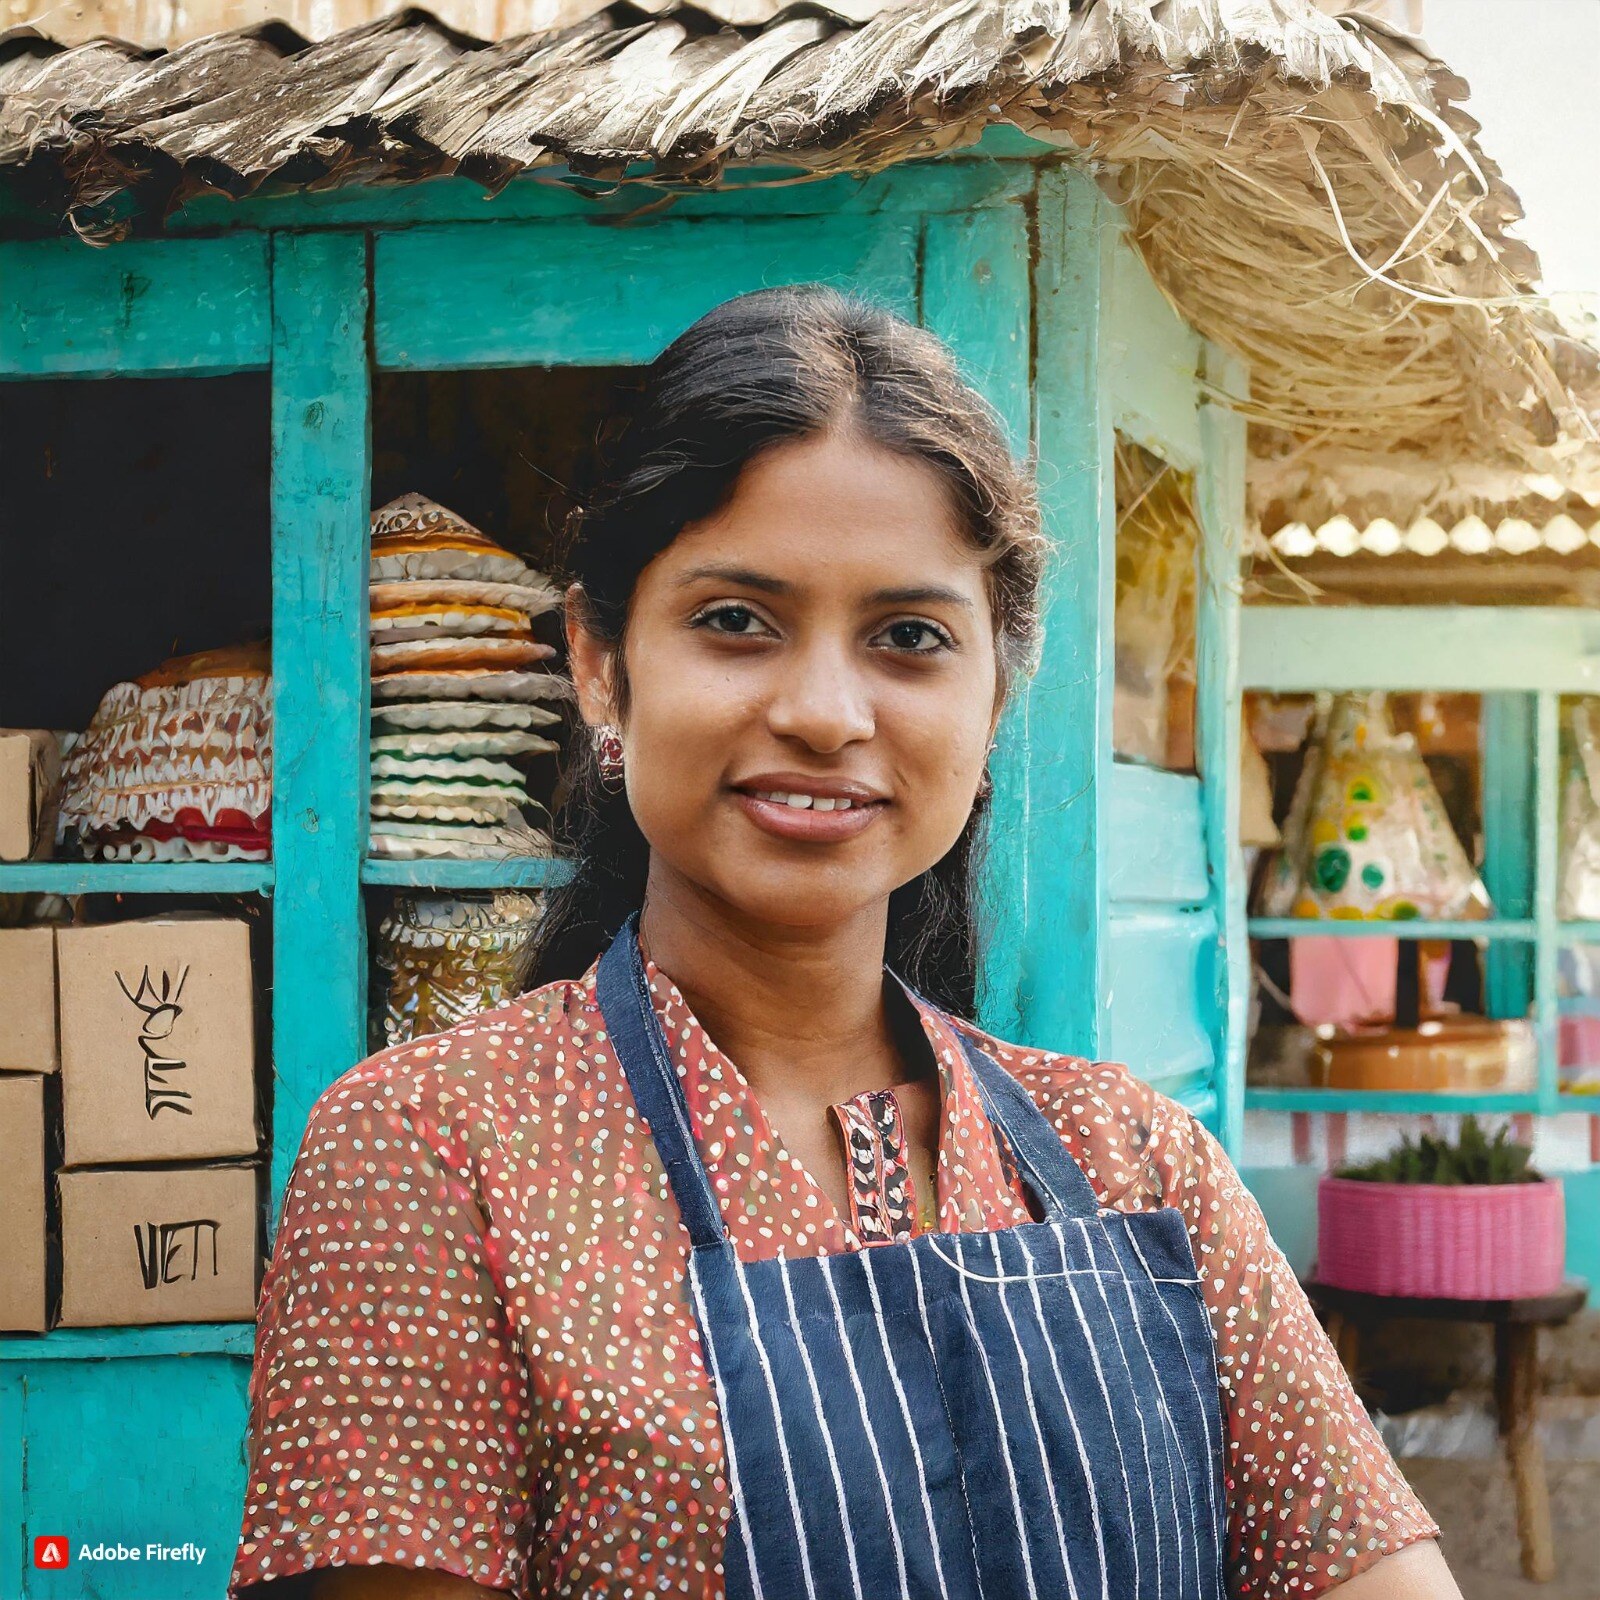 In this image, a women entrepreneur is shown who is empowering society with BANKIT banking and financial services.